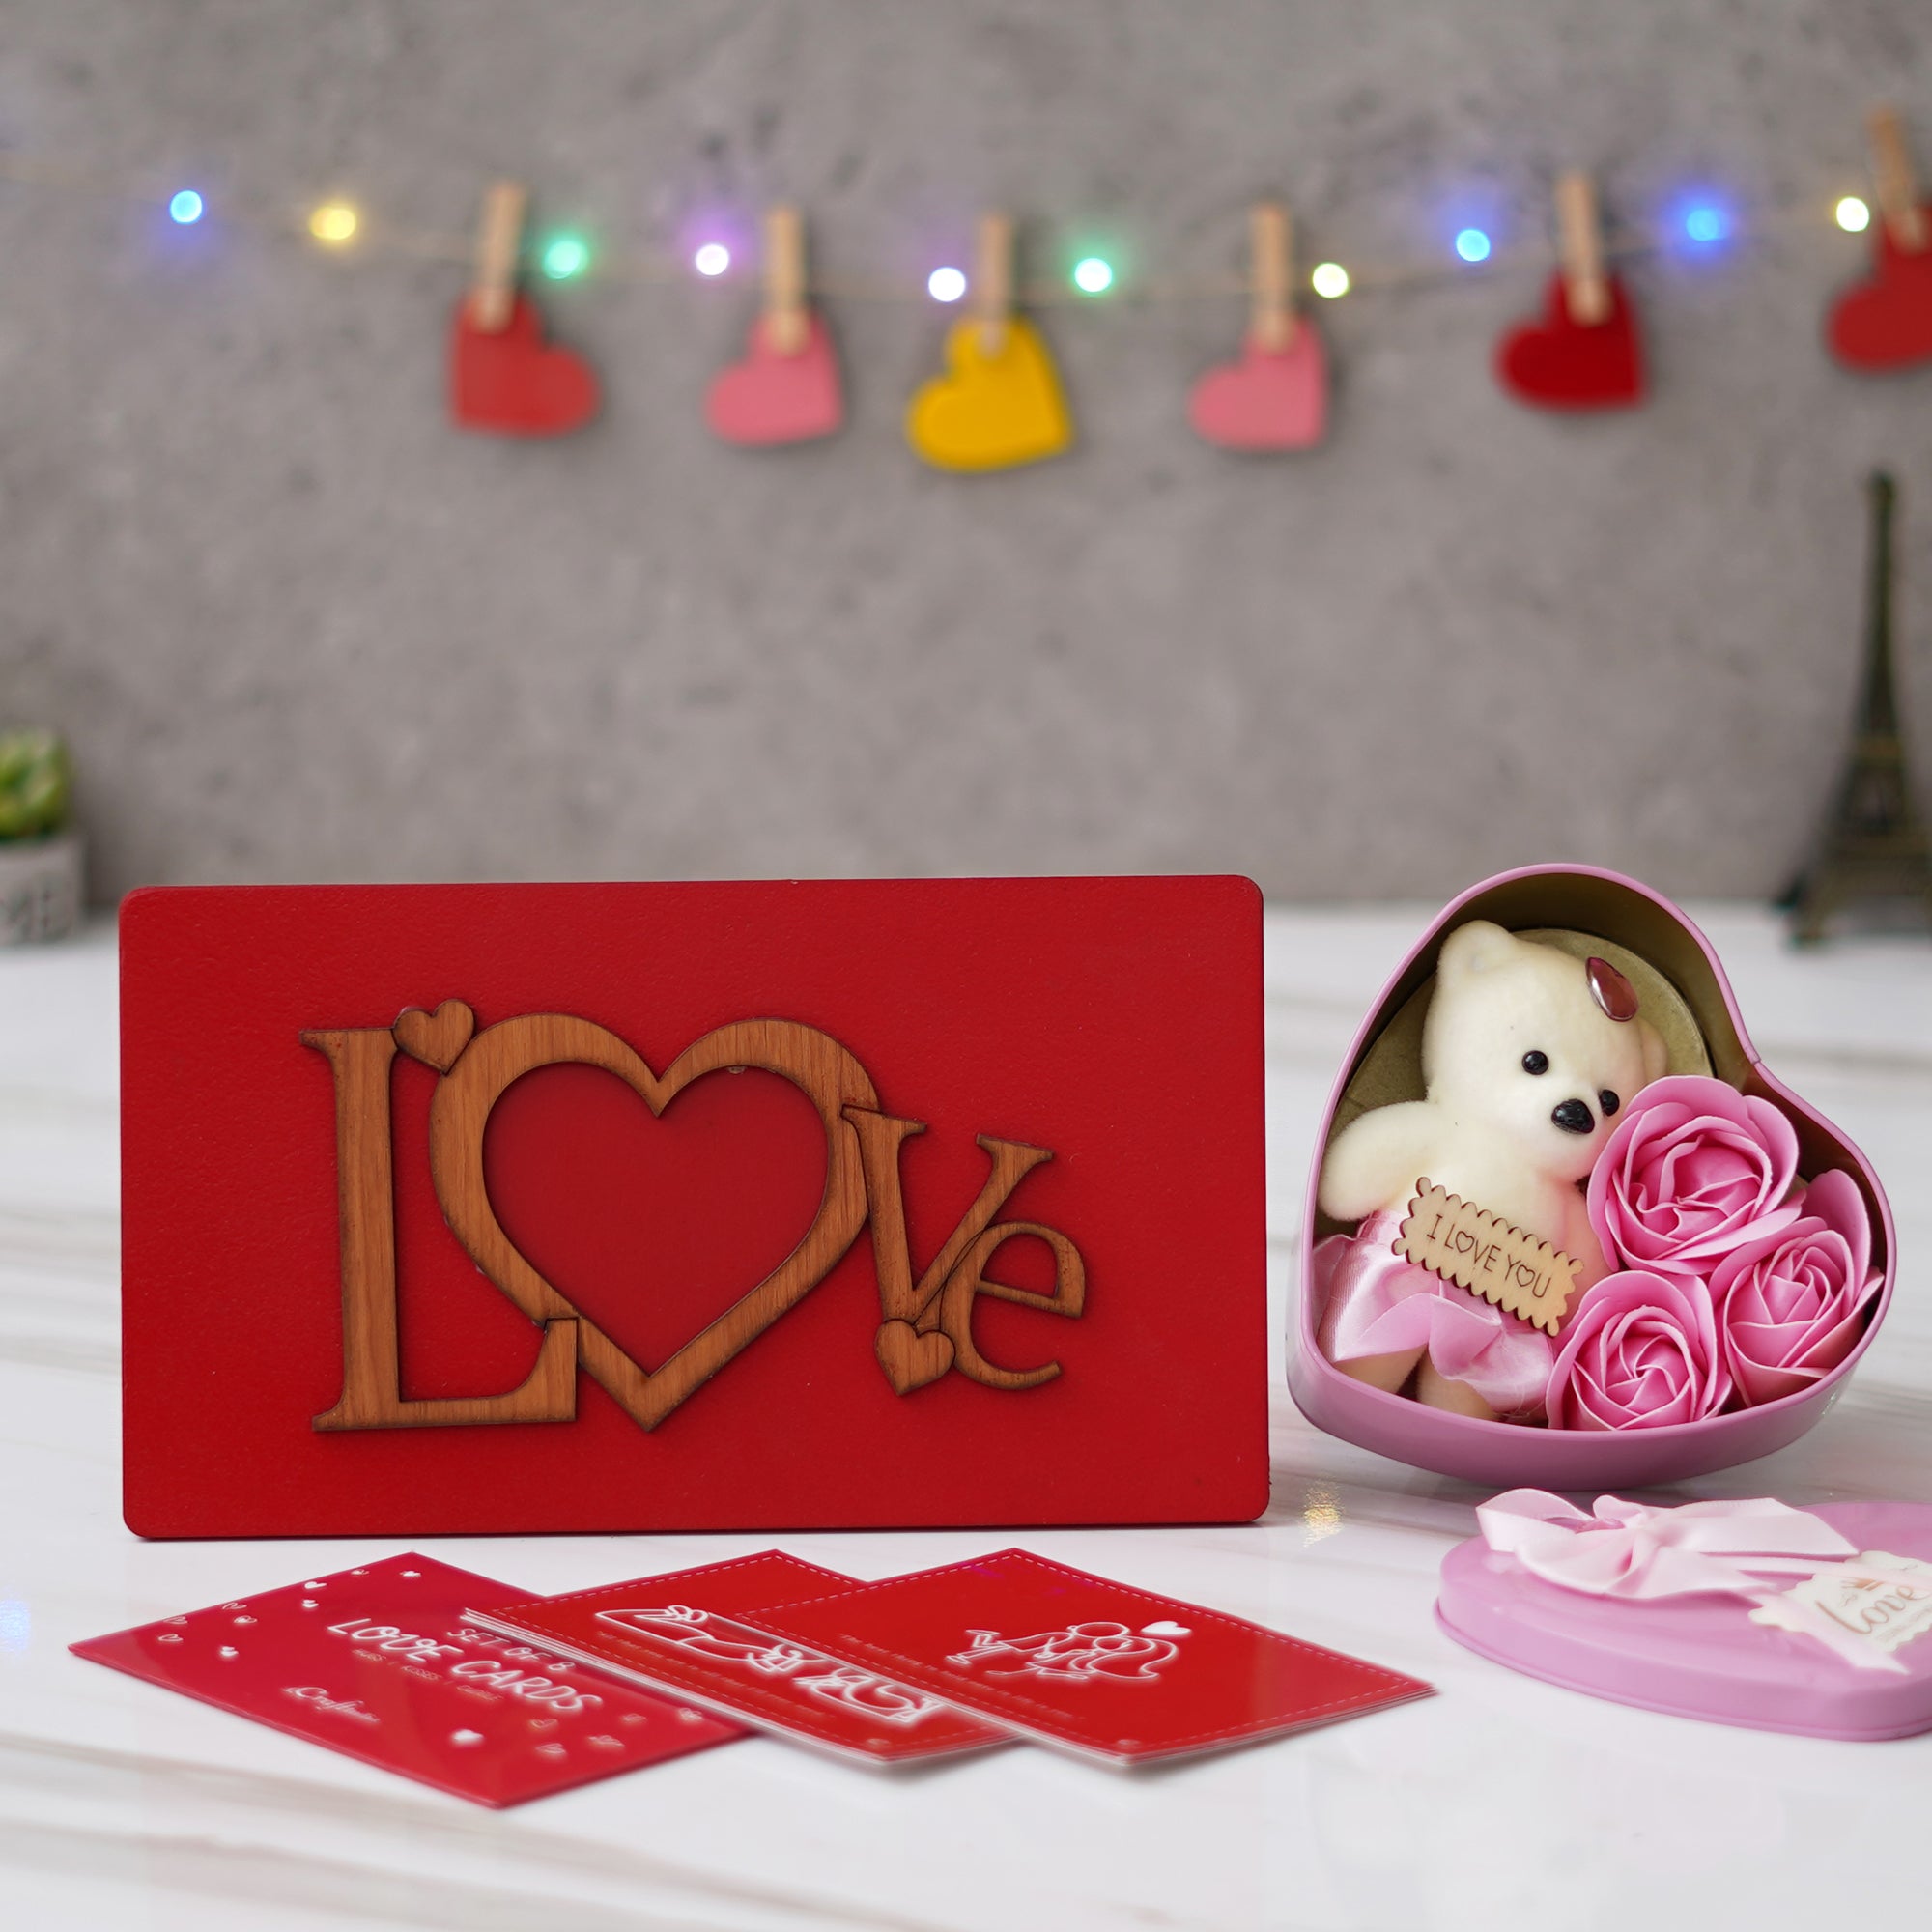 Valentine Combo of Pack of 8 Love Gift Cards, "Love" Wooden Photo Frame With Red Stand, Pink Heart Shaped Gift Box with Teddy and Roses